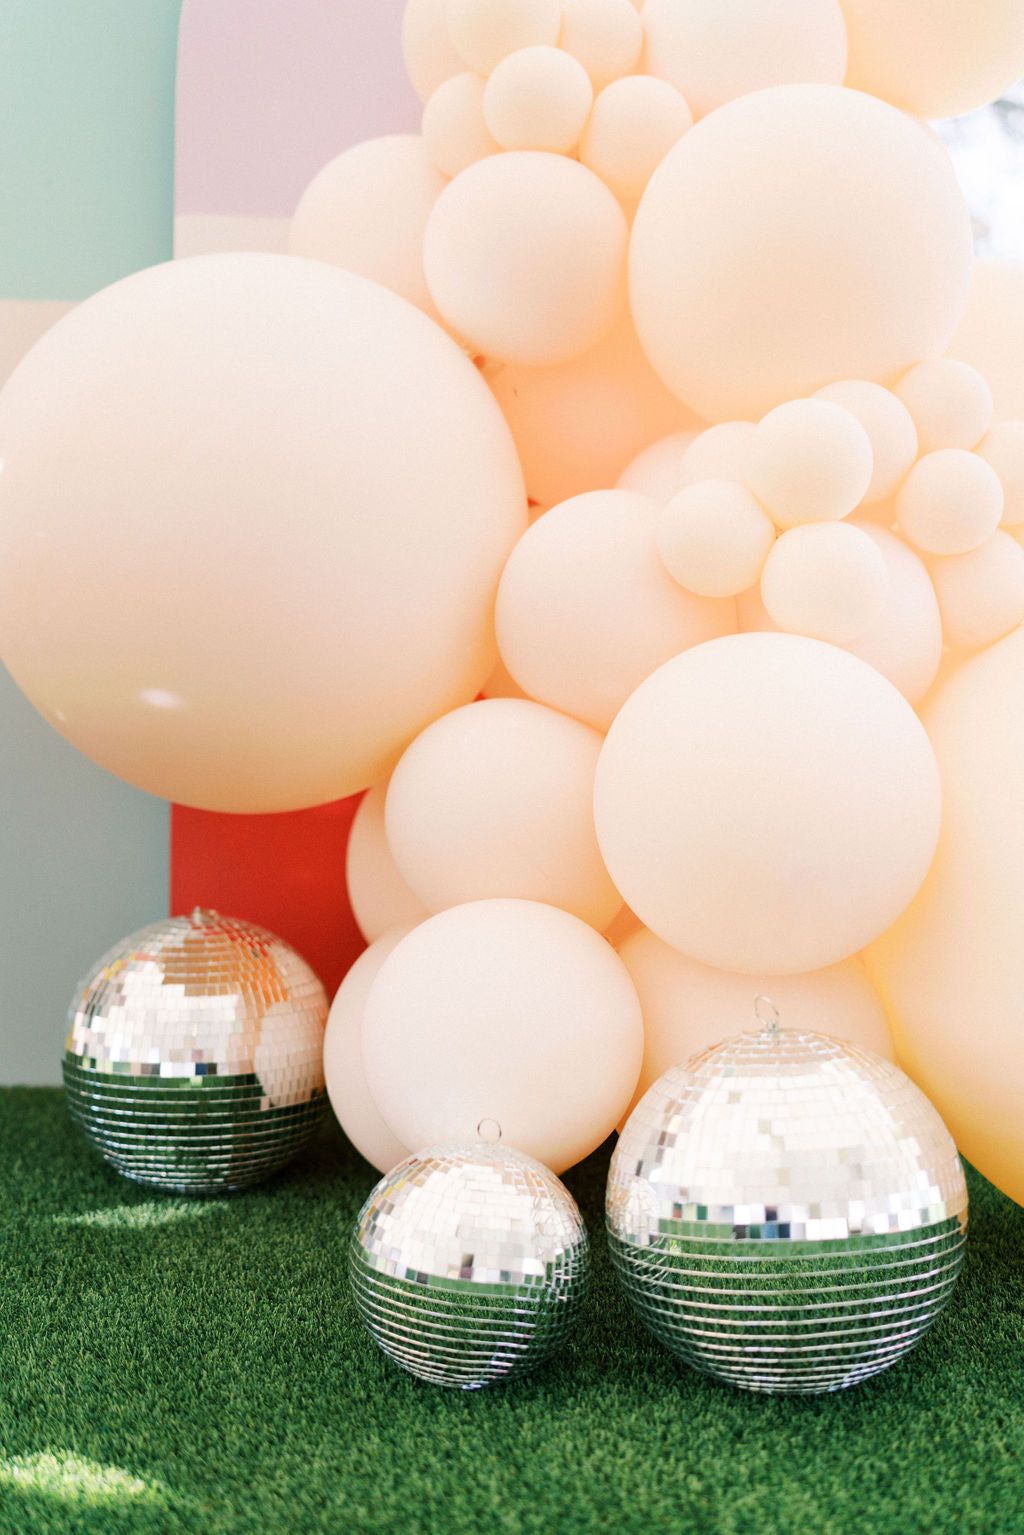 Balloons and discol balls by Revelry Goods in Houston, TX for modern kids birthday celebration